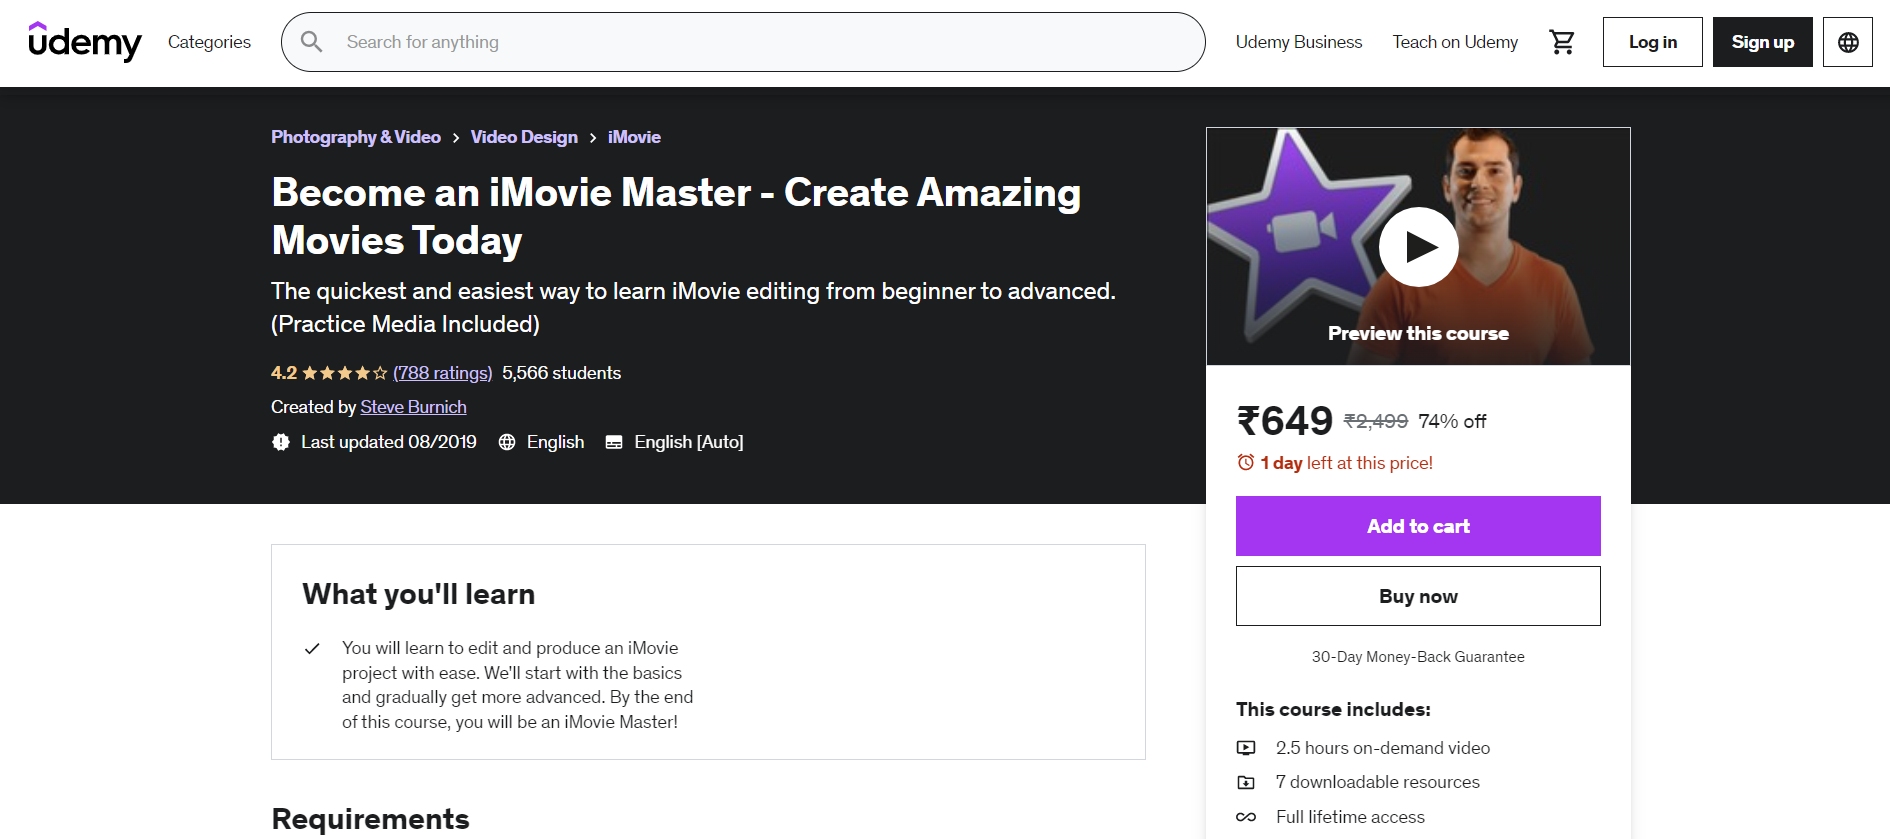 Become An iMovie Master - Create Amazing Movies Today